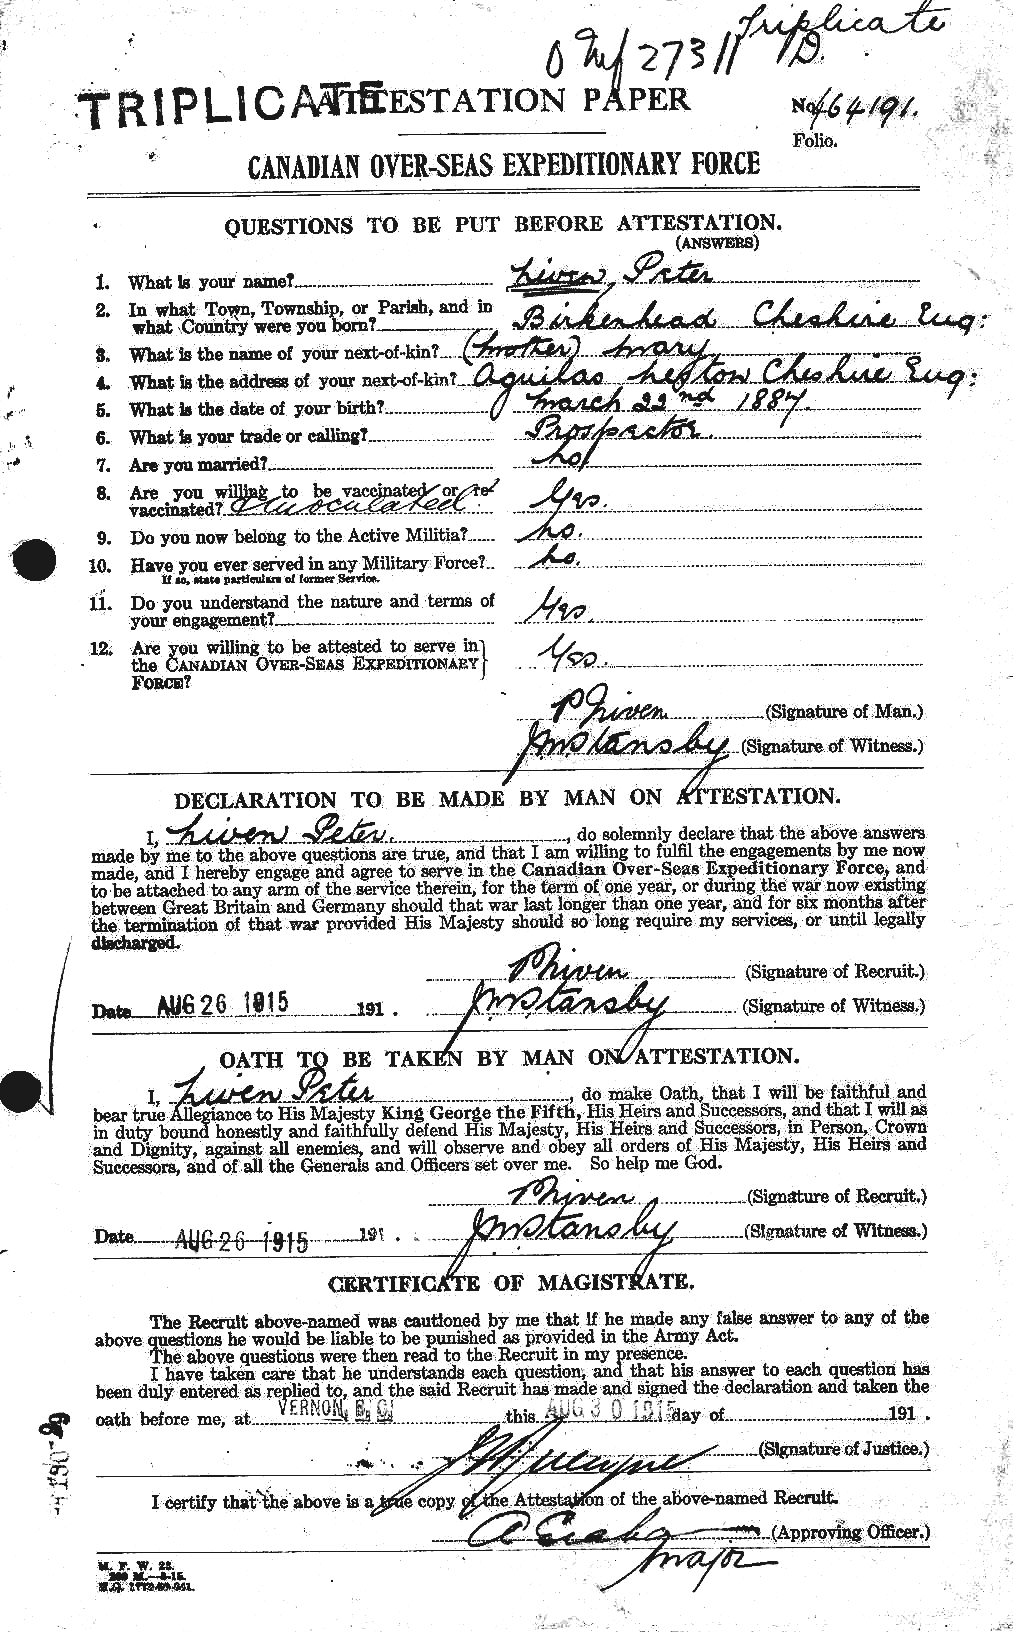 Personnel Records of the First World War - CEF 547589a